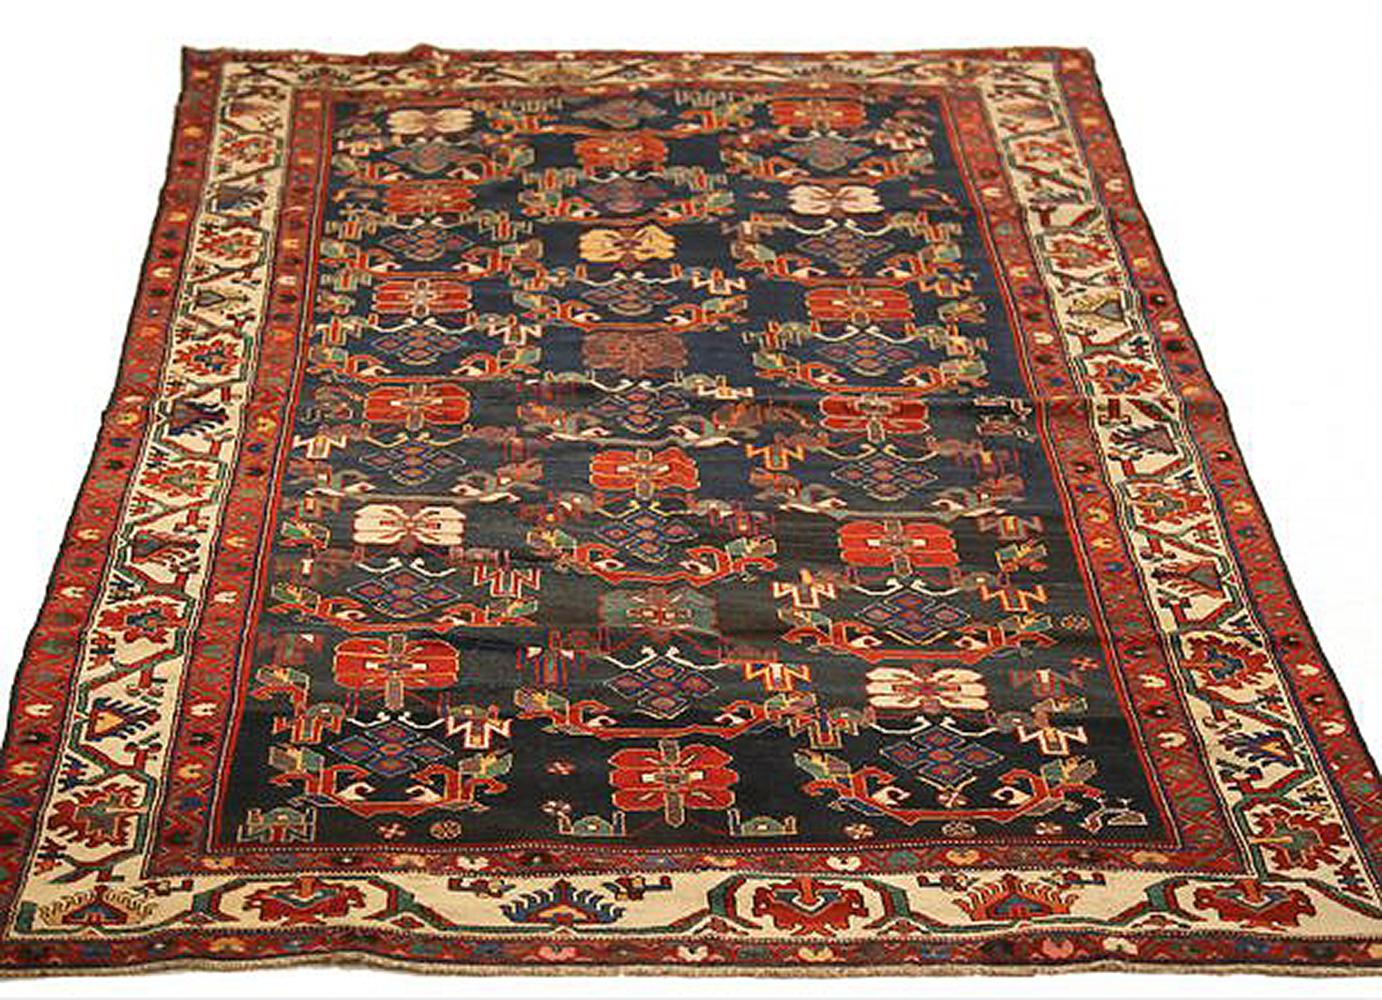 Antique Persian rug handwoven from the finest sheep’s wool and colored with all-natural vegetable dyes that are safe for humans and pets. It’s a traditional Bakhtiar design showing green and red flower patterns over a black field. It’s a beautiful